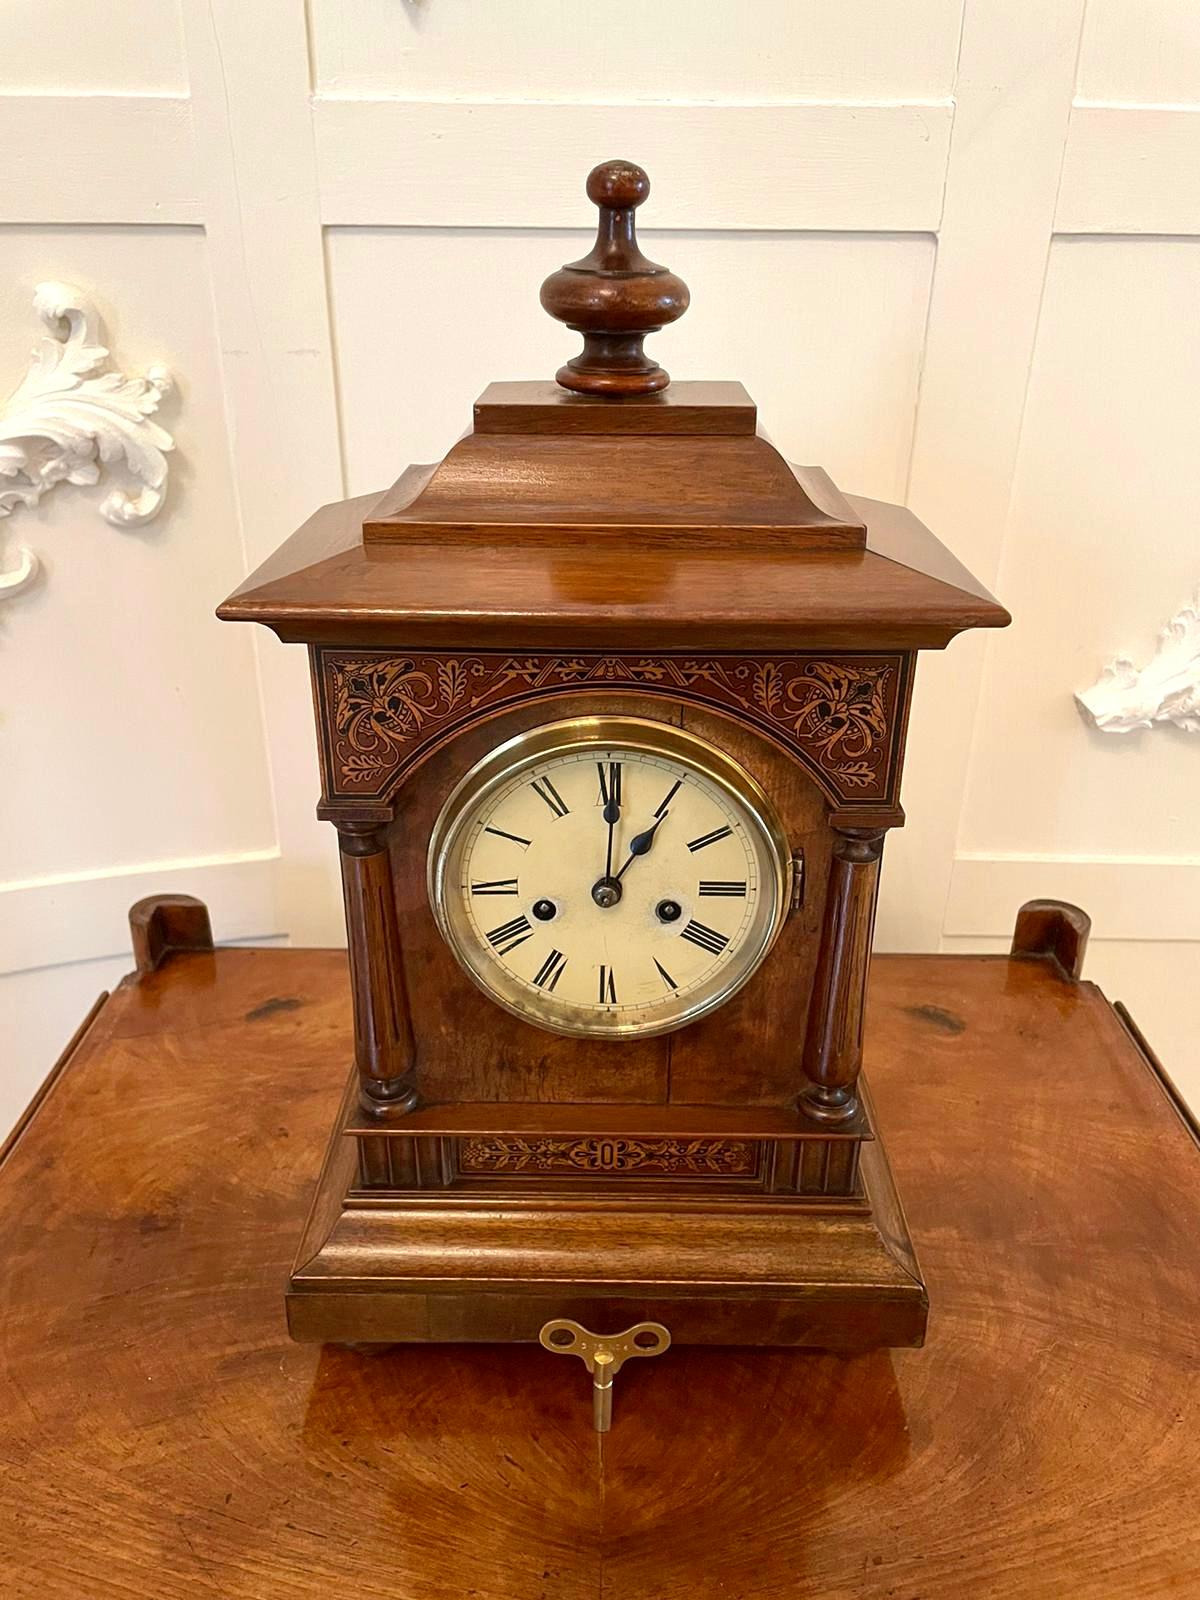 Antique 19th century Victorian walnut inlaid eight day mantel clock having a turned walnut finial to the attractive shaped top, a fantastic quality inlaid walnut case with two turned reeded columns, a brass bezel, pretty painted dial with original